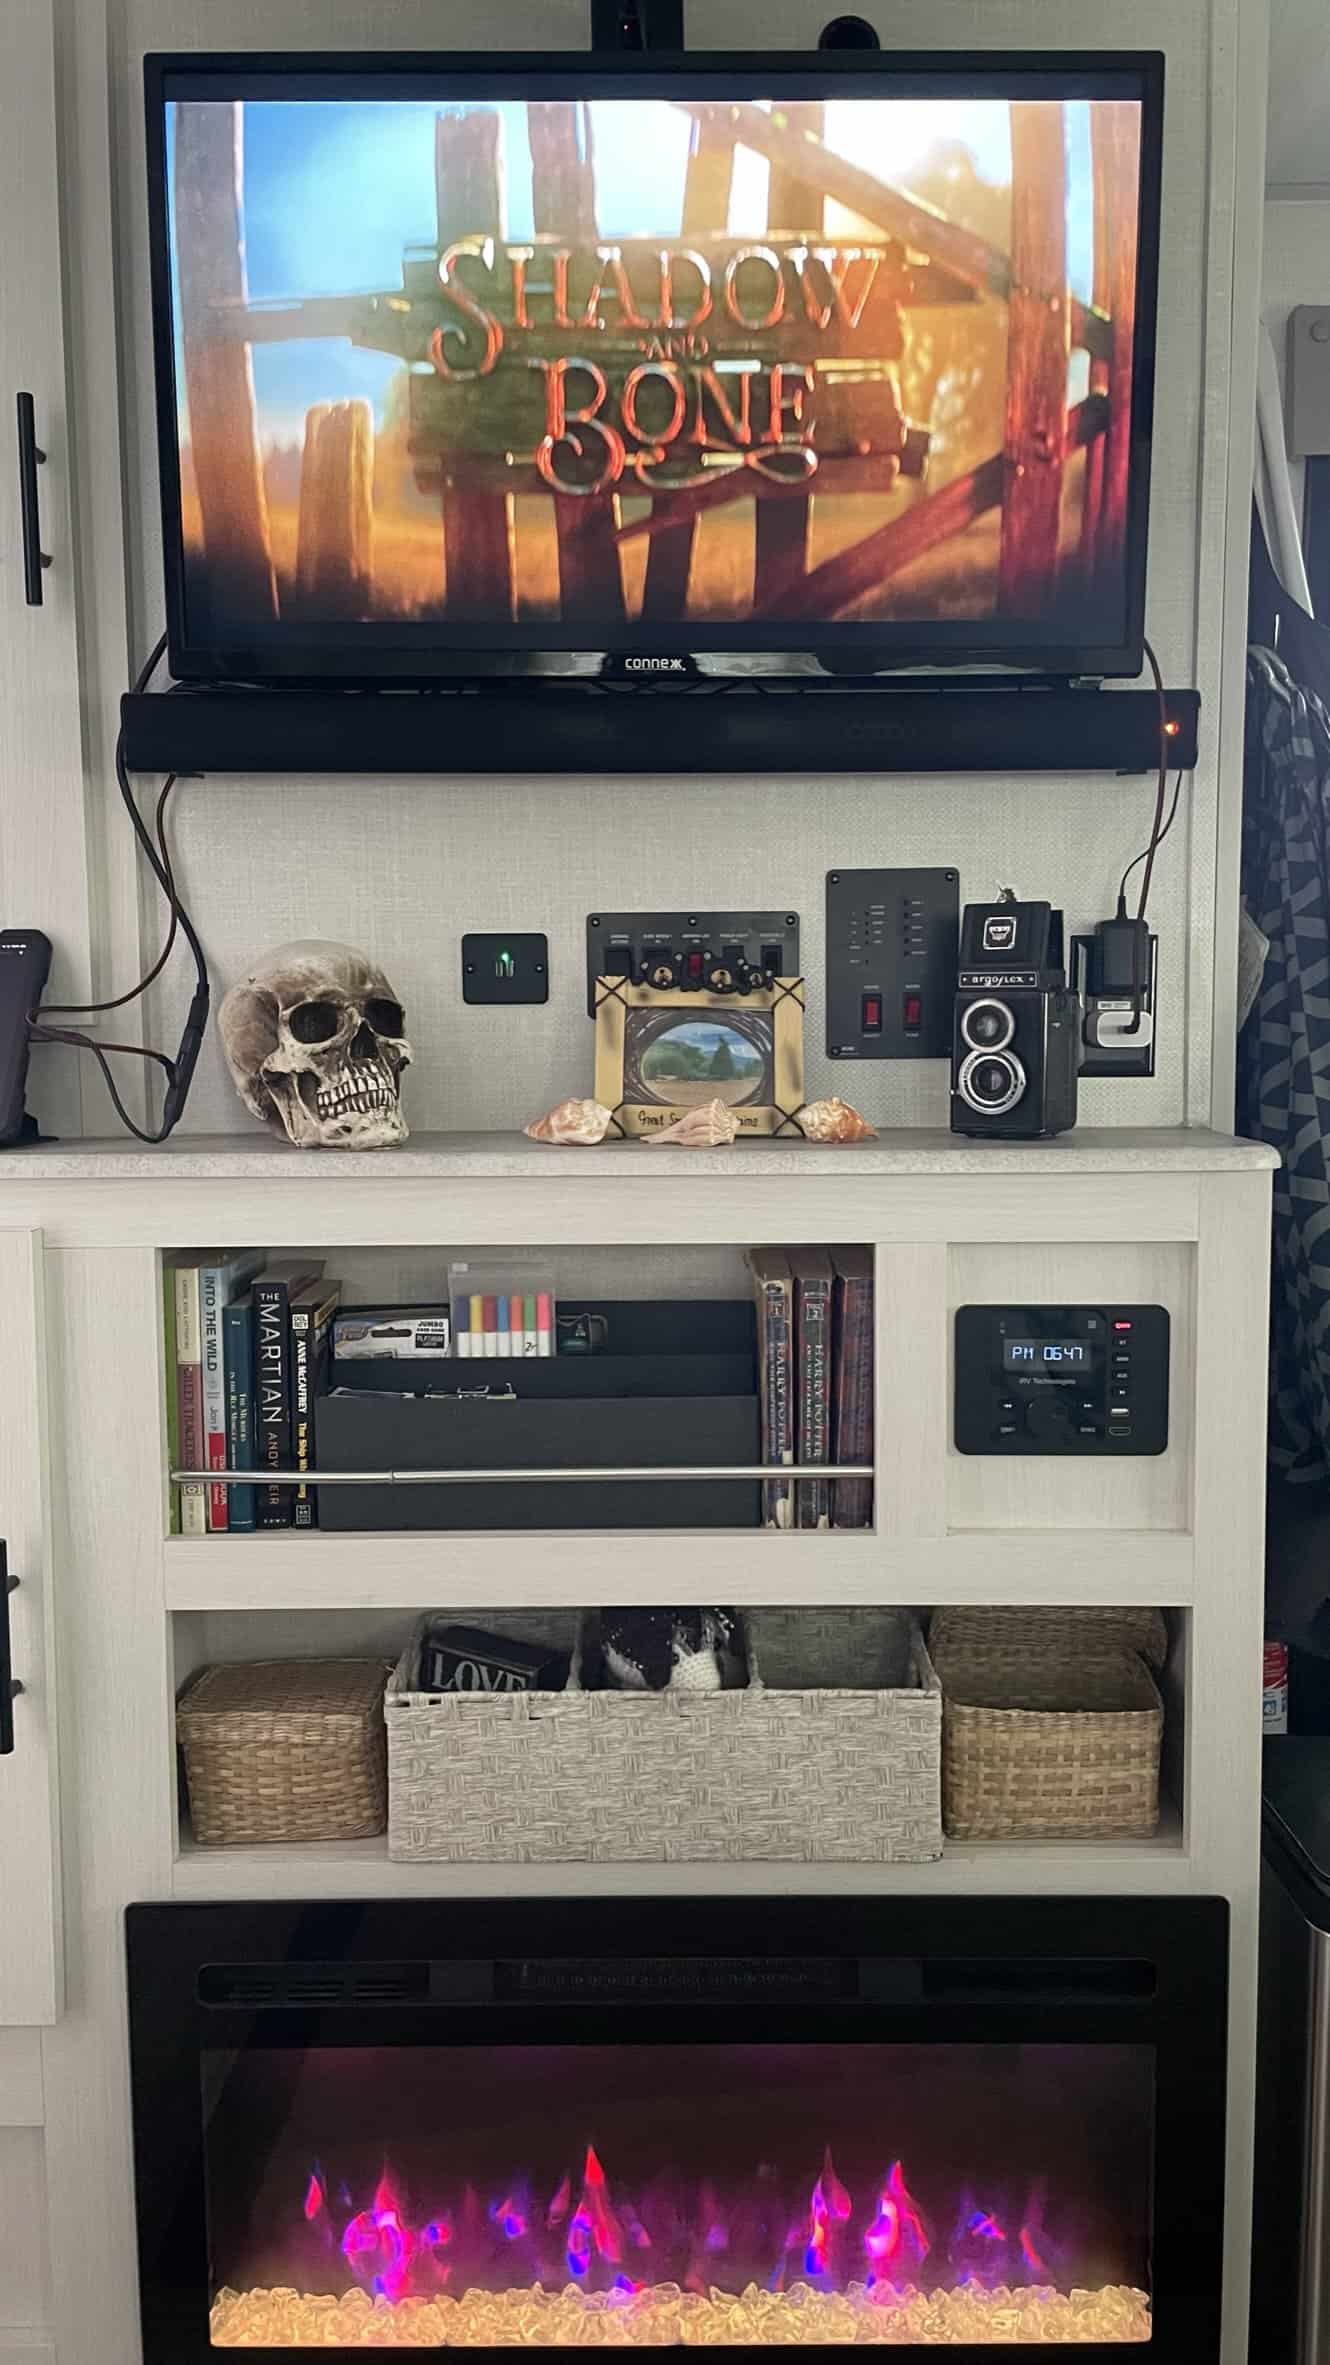 Movie nights with the r-pod RP-202 entertainment center (Image: Sky Arvin)